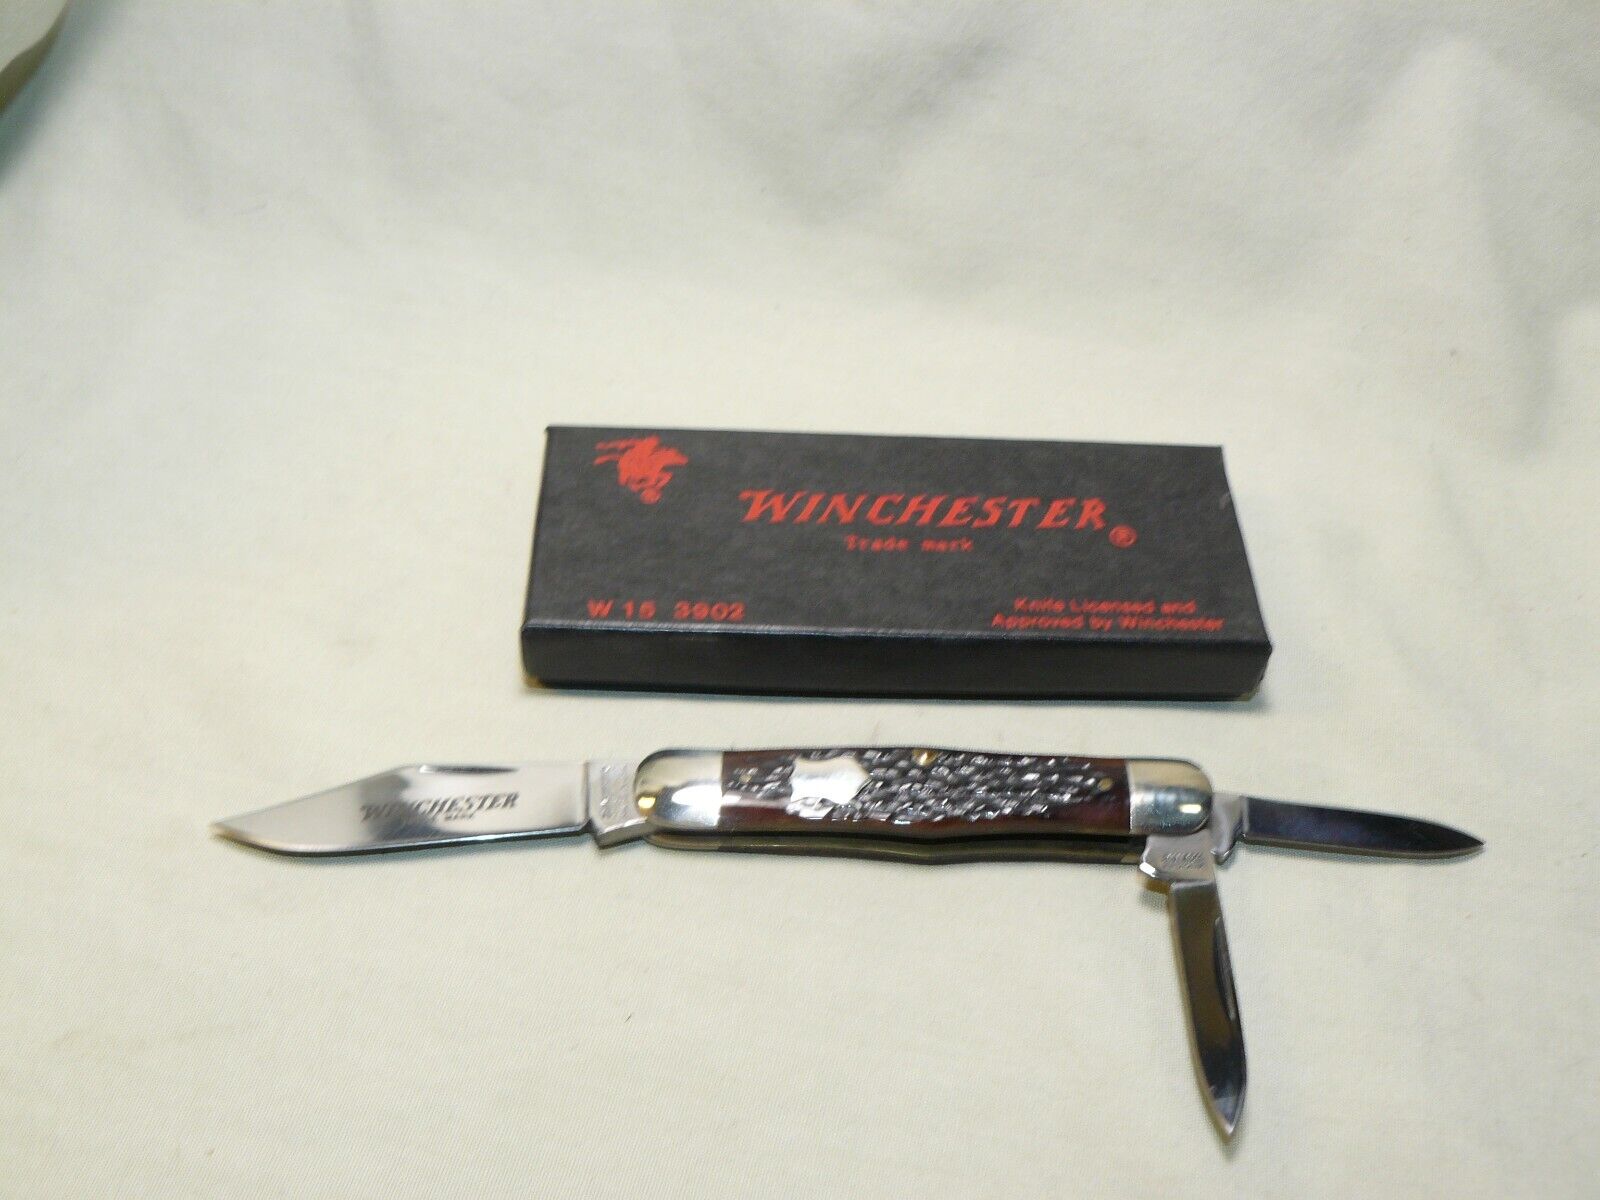 1990 Winchester W-15 #3902 Three Blade Knife with Box - Unused